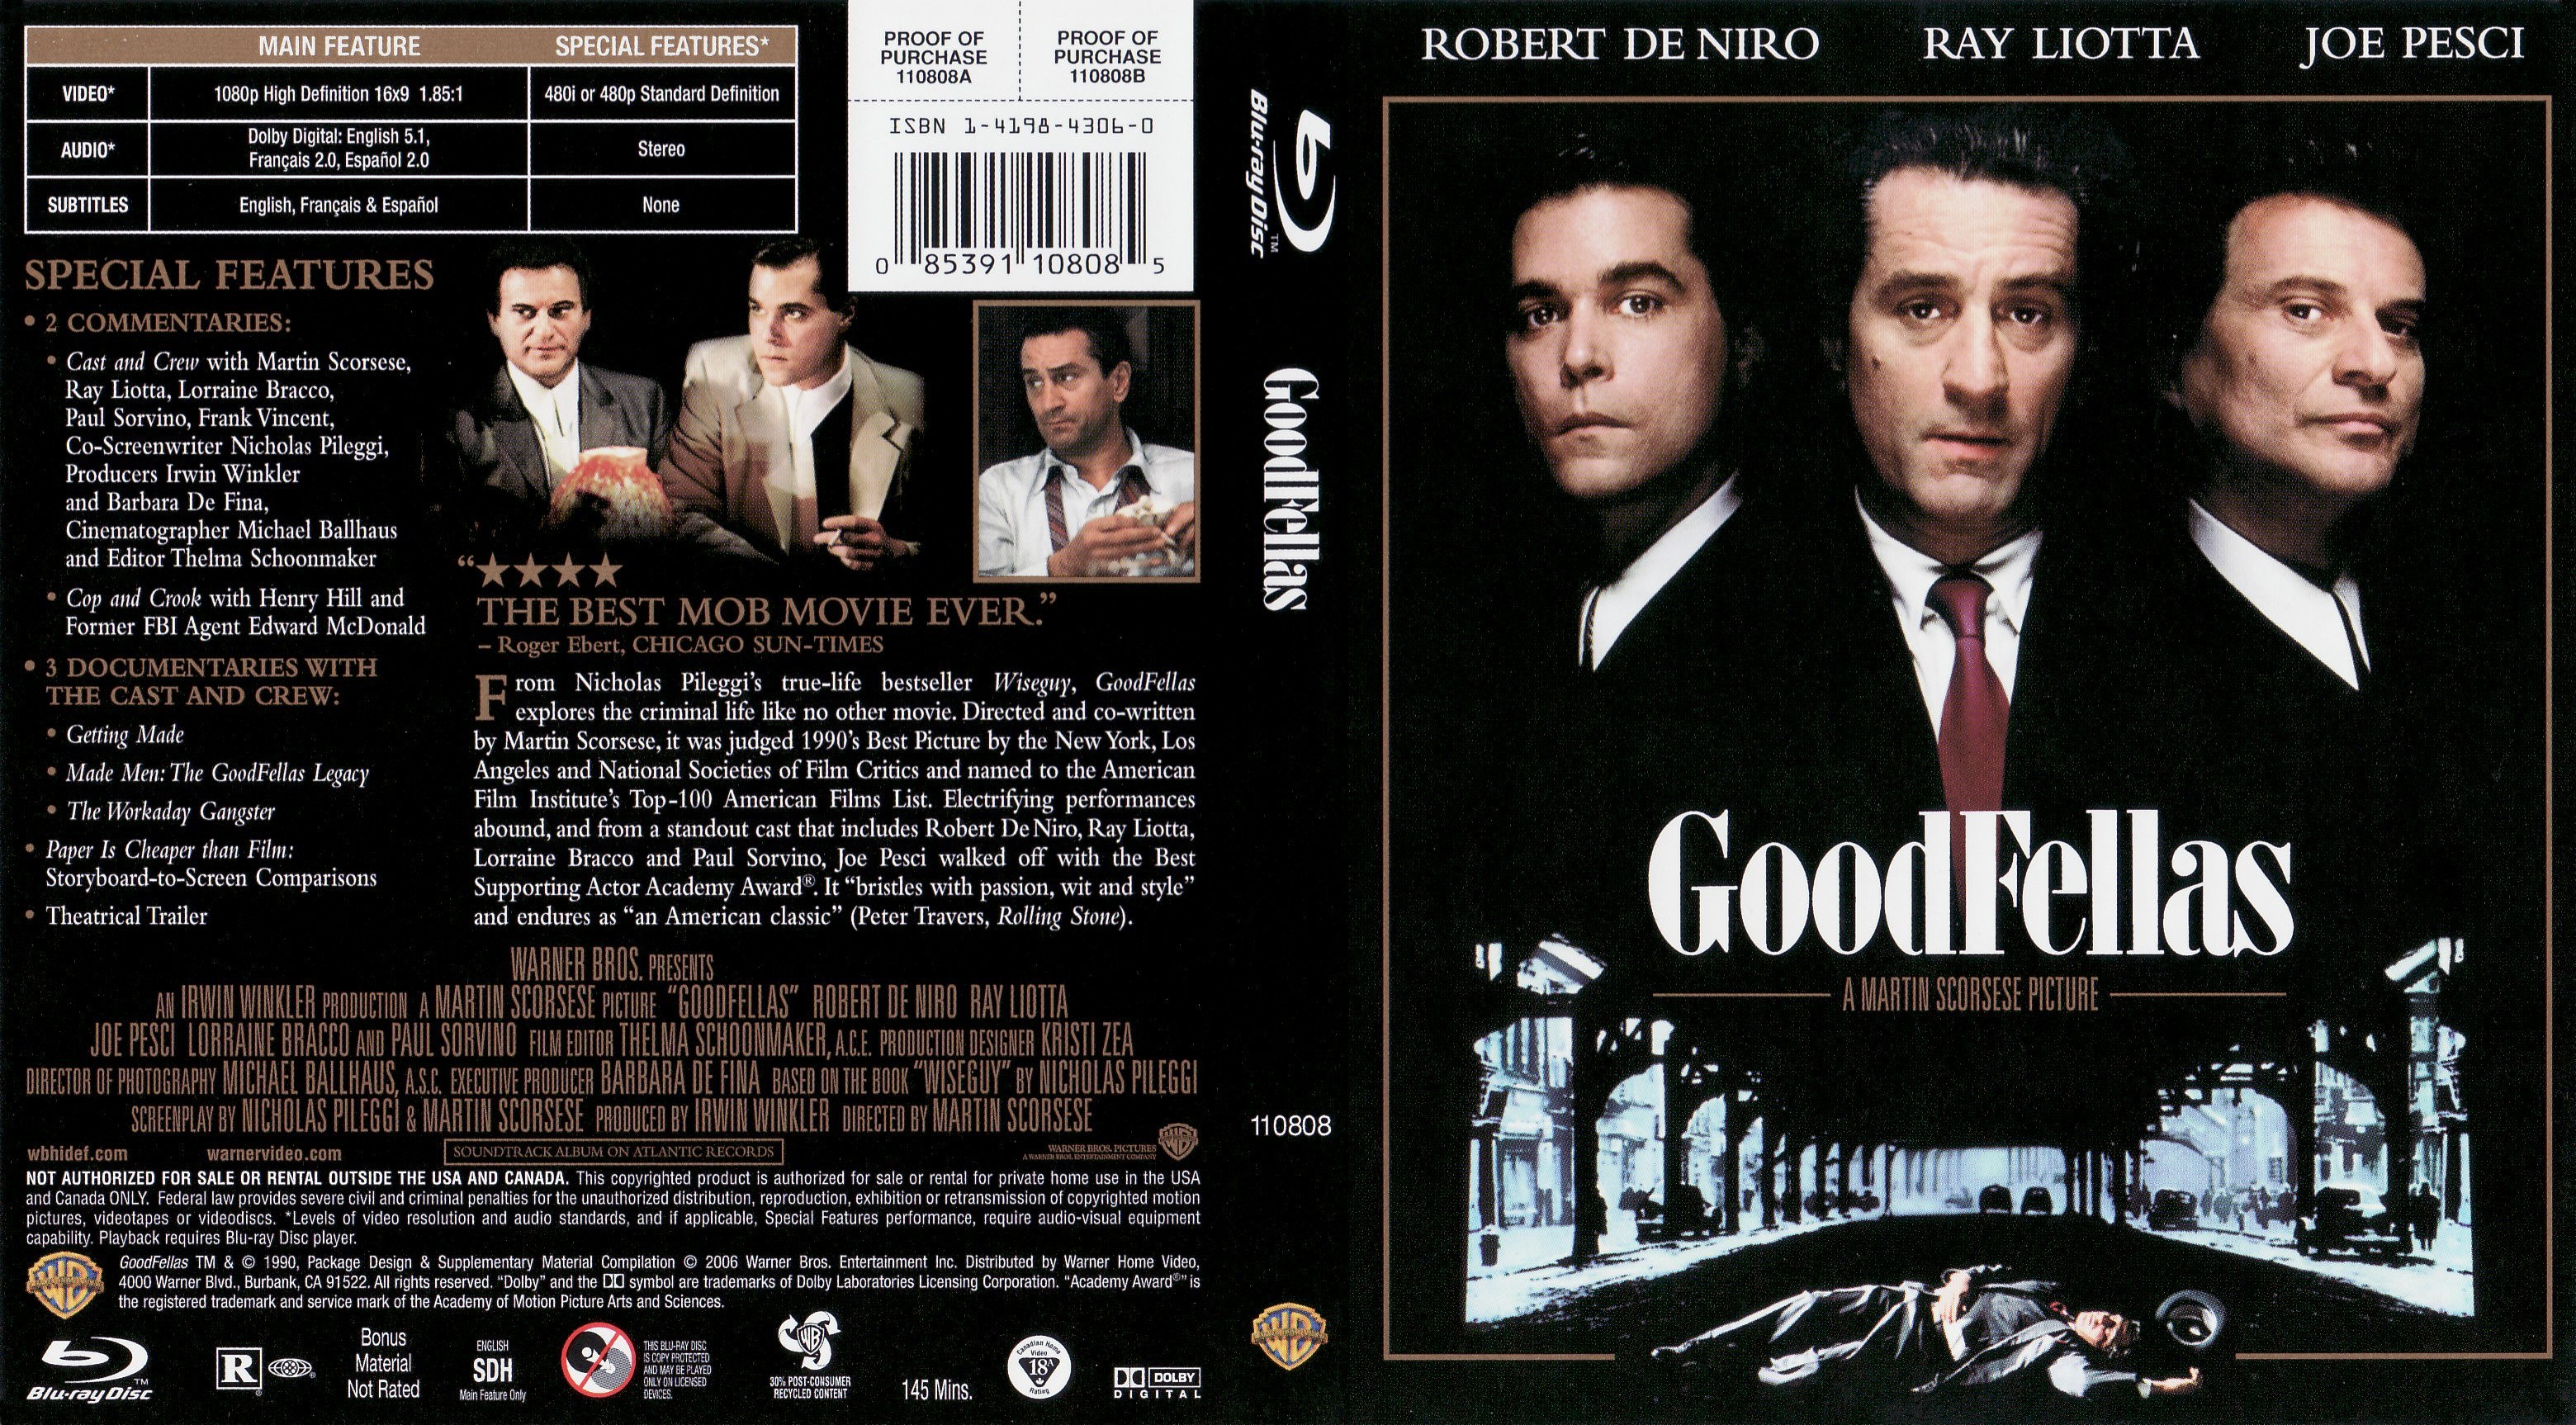 Jaquette DVD Goodfellas - Les affranchis (Canadienne) (BLU-RAY)